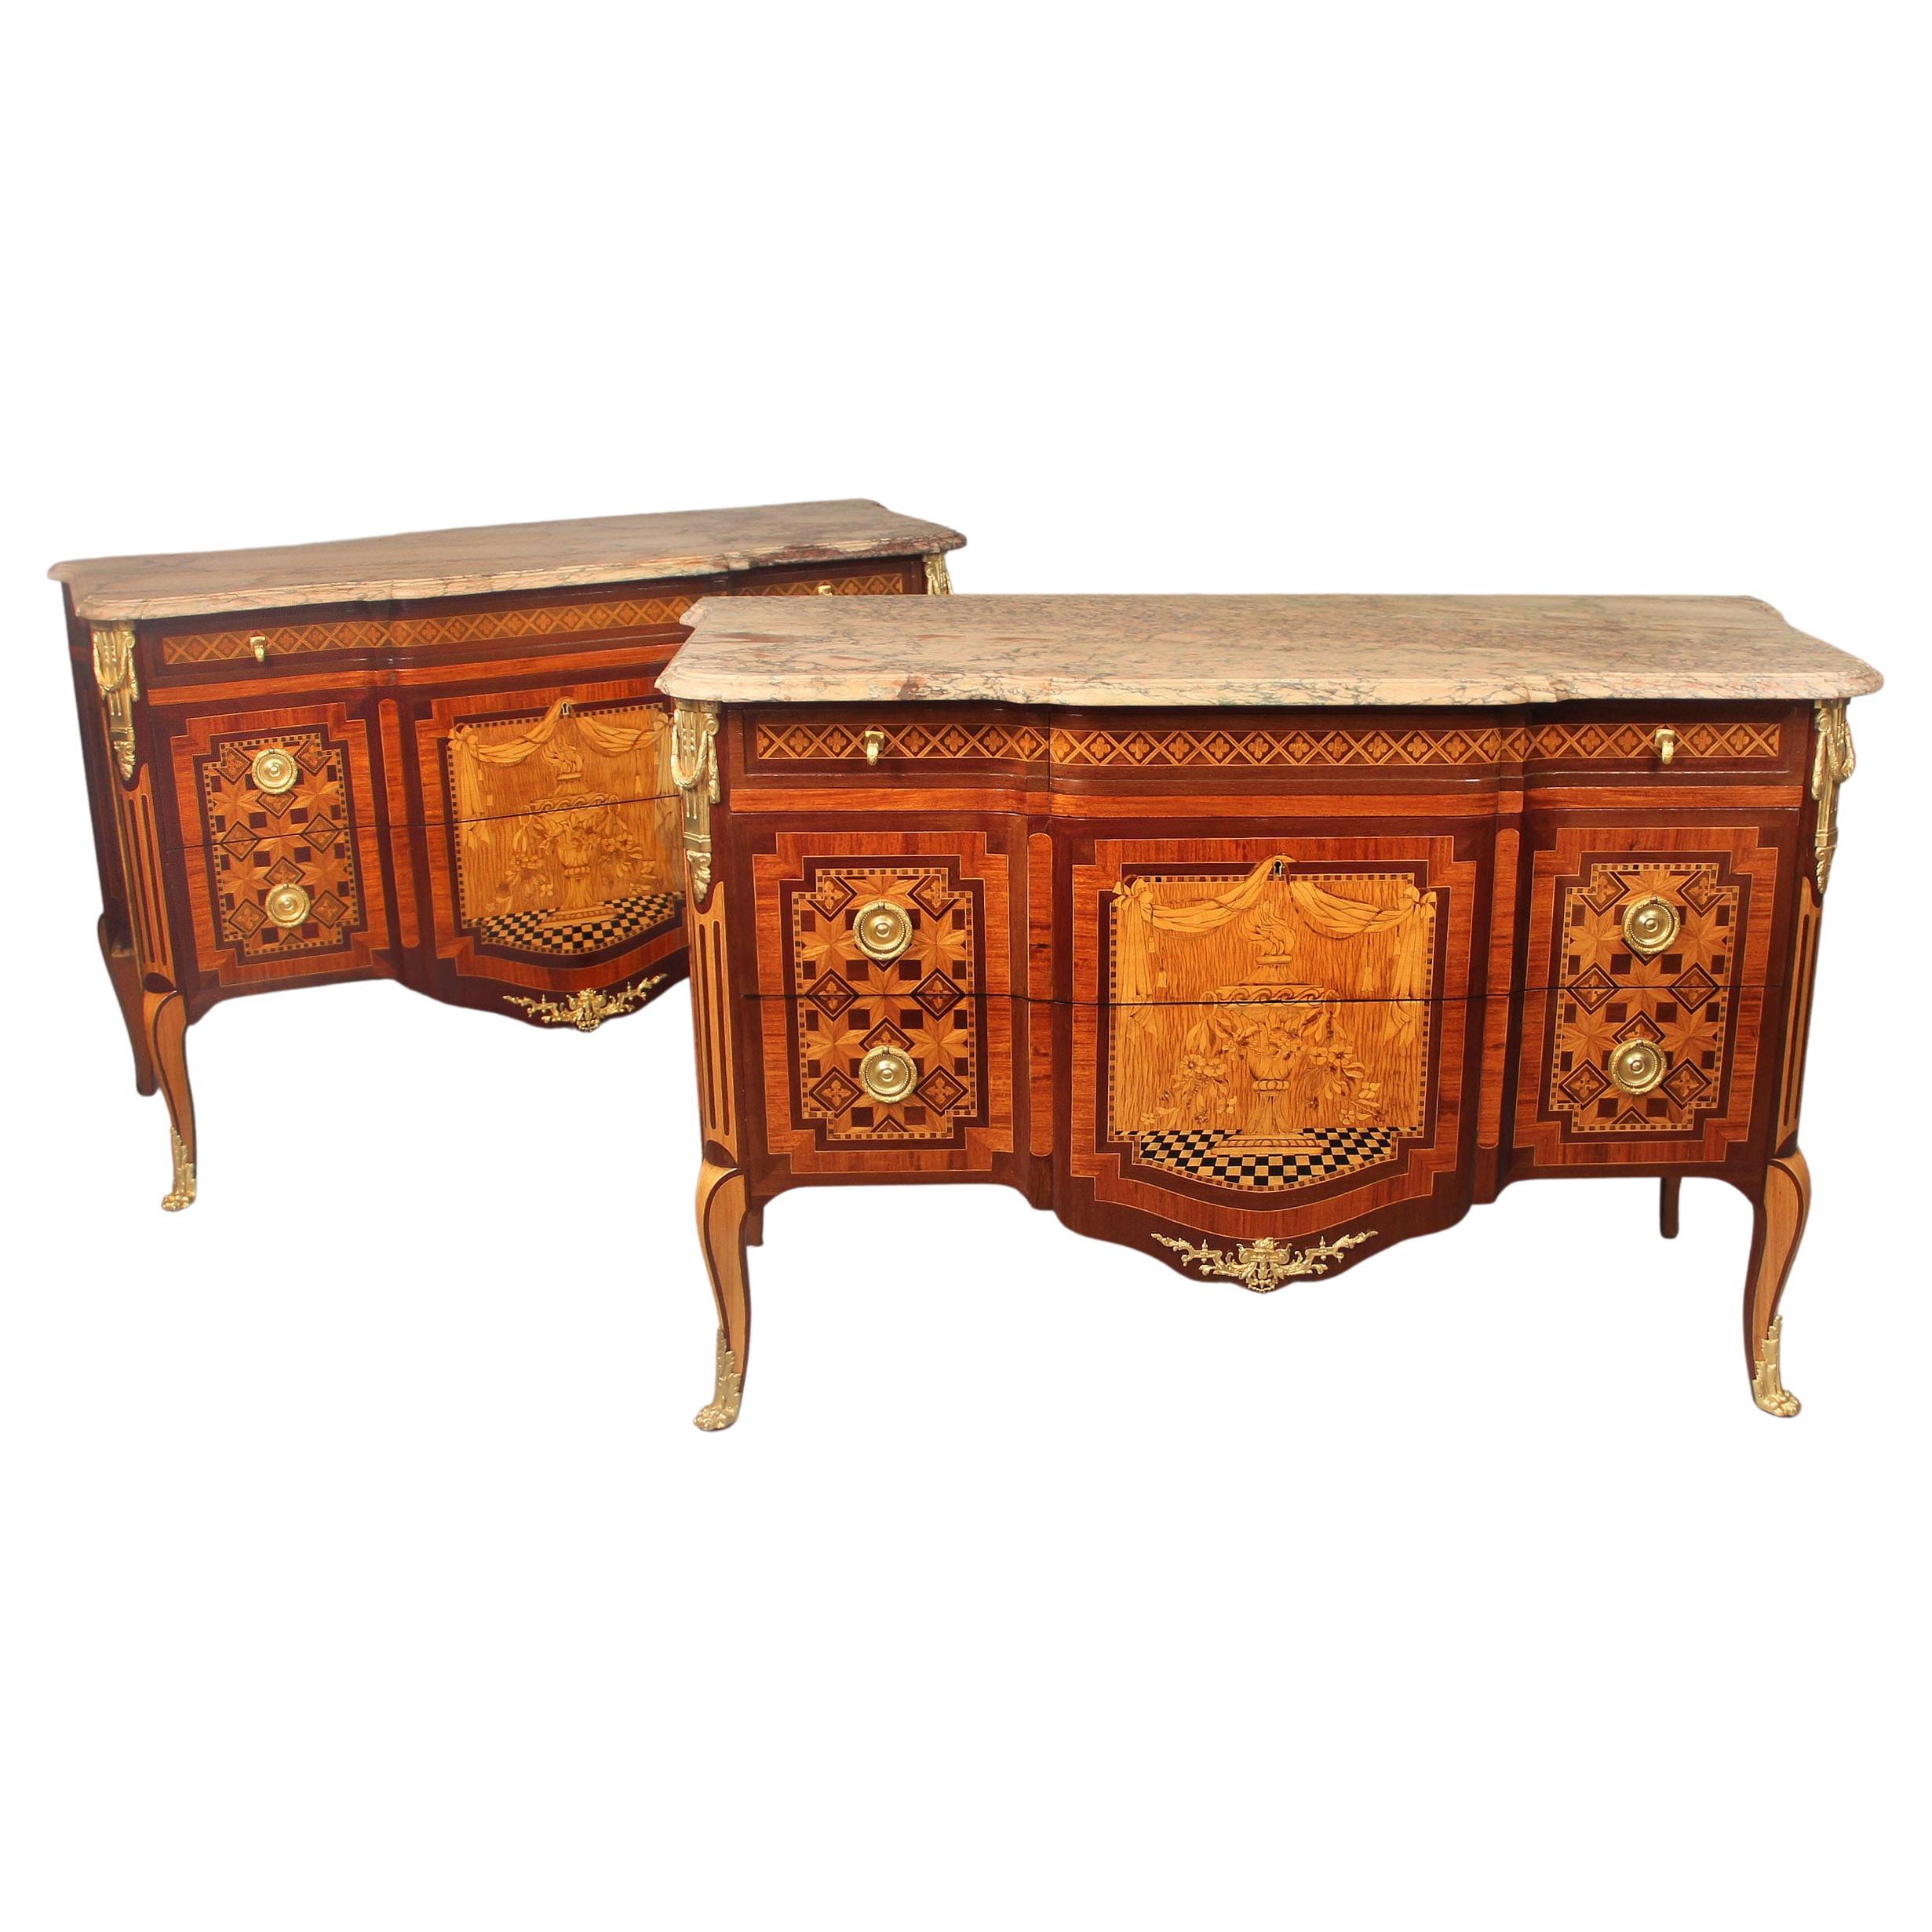 Fantastic Pair of Early 20th Century Gilt Bronze Mounted Inlaid Commodes